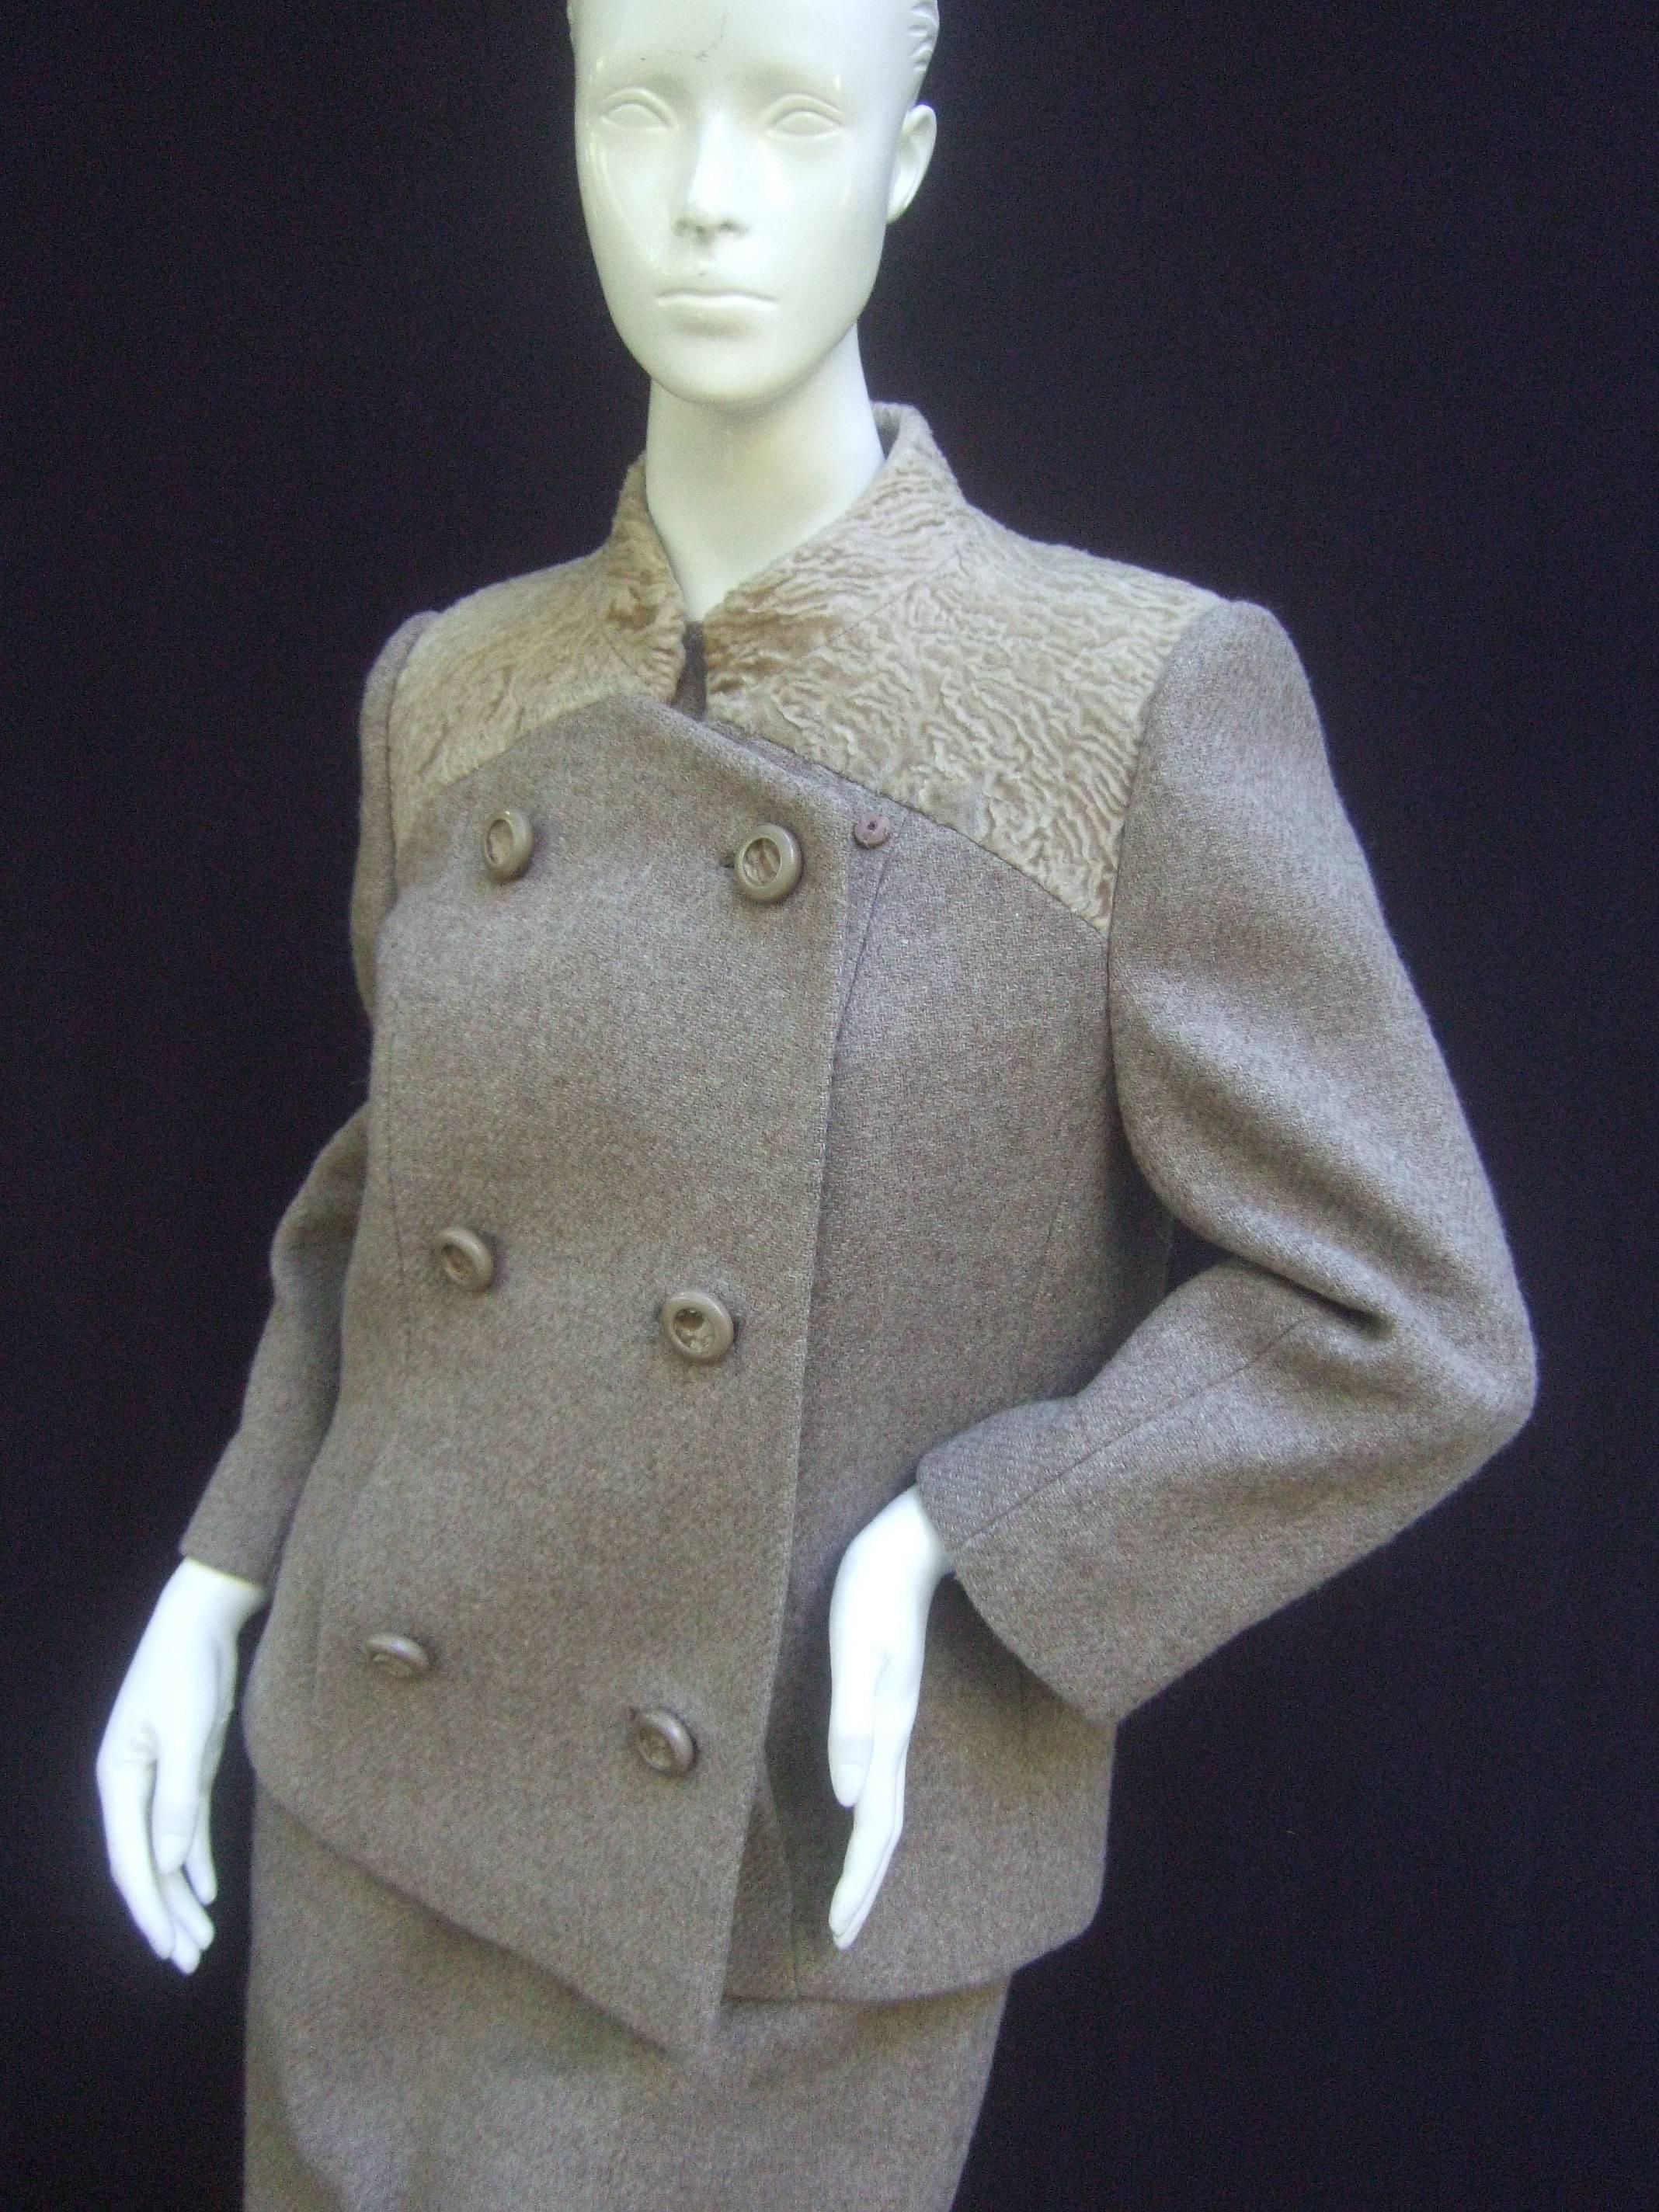 Peck & Peck Rare Broadtail Trim Brown Wool Jacket & Sheath Ensemble c 1970 In Good Condition In University City, MO